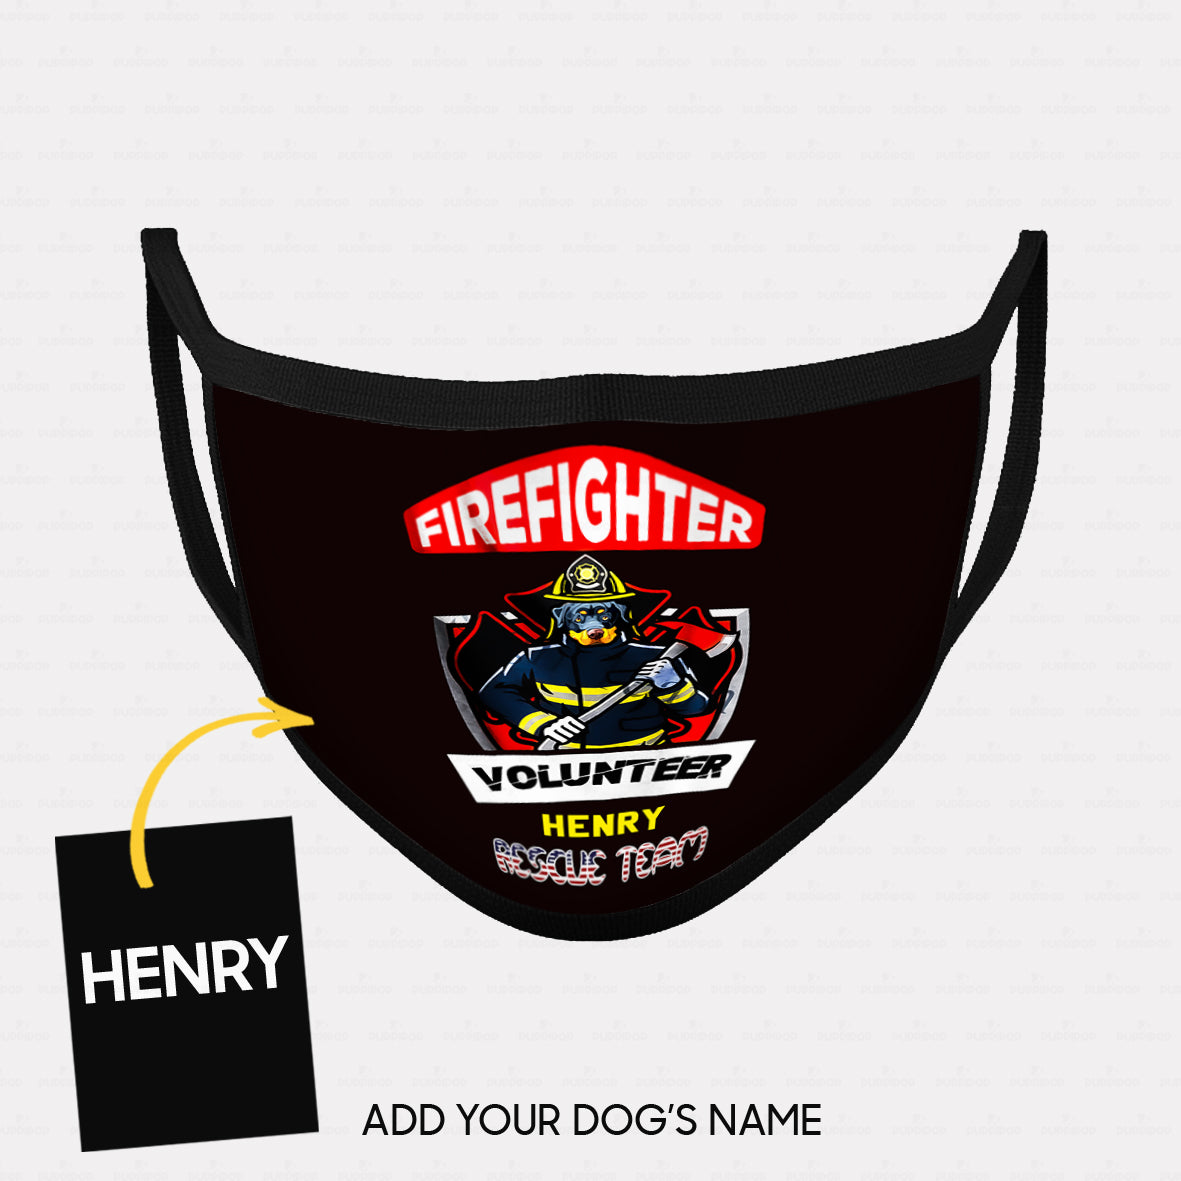 Personalized Dog Gift Idea - Firefighter Volunteer Rescue Team For Dog Lovers - Cloth Mask